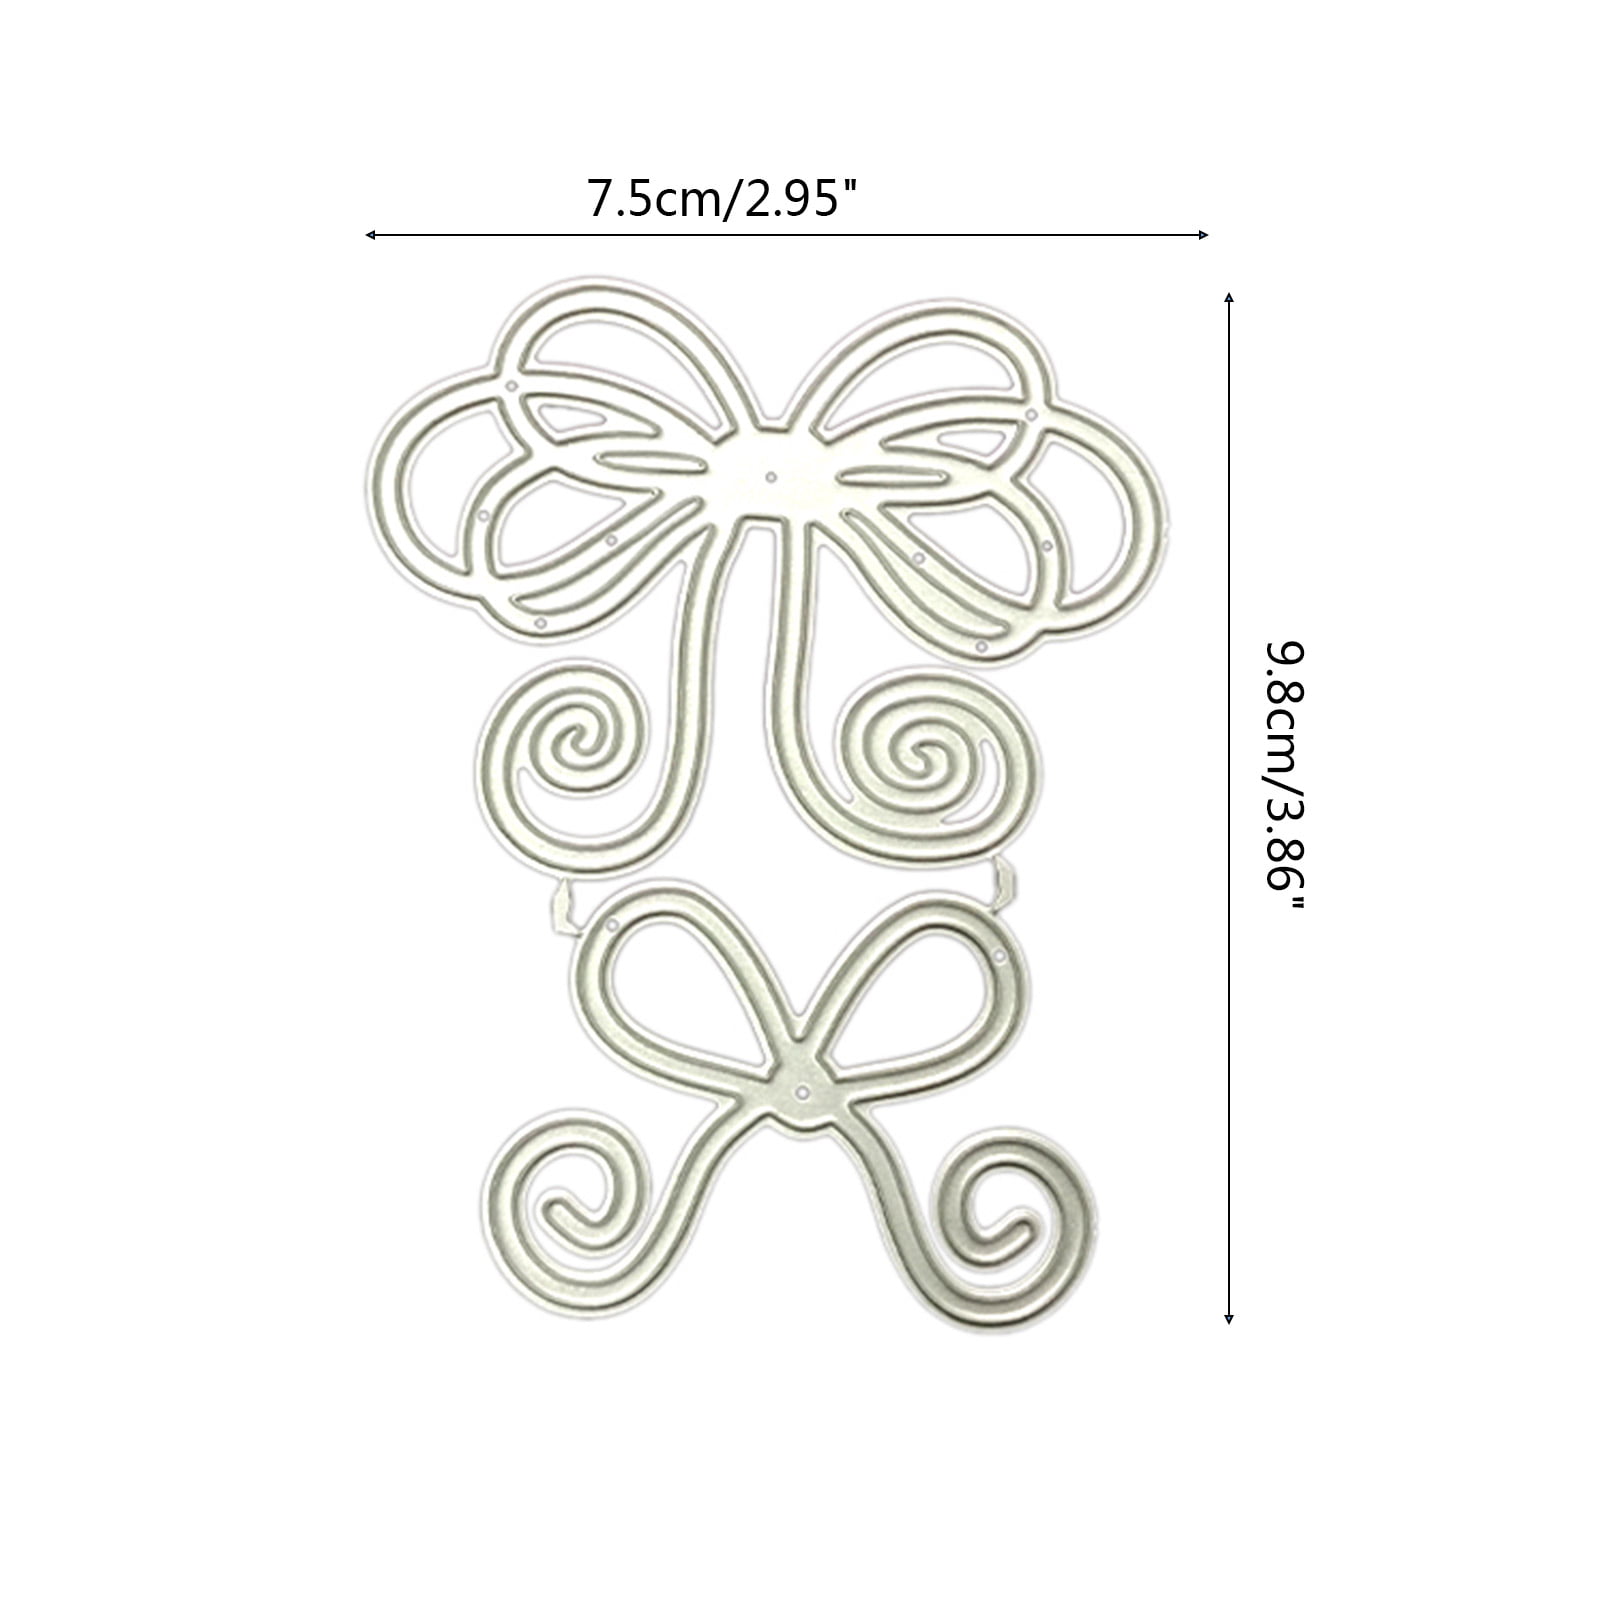 Love Bow-Knot DIY Crafts Template Paper Cards Cutting Dies Cut Stencils for DIY Embossing Card Making Book Tags Decorative Paper Dies Scrapbooking B Metal Cutting Die Cuts 